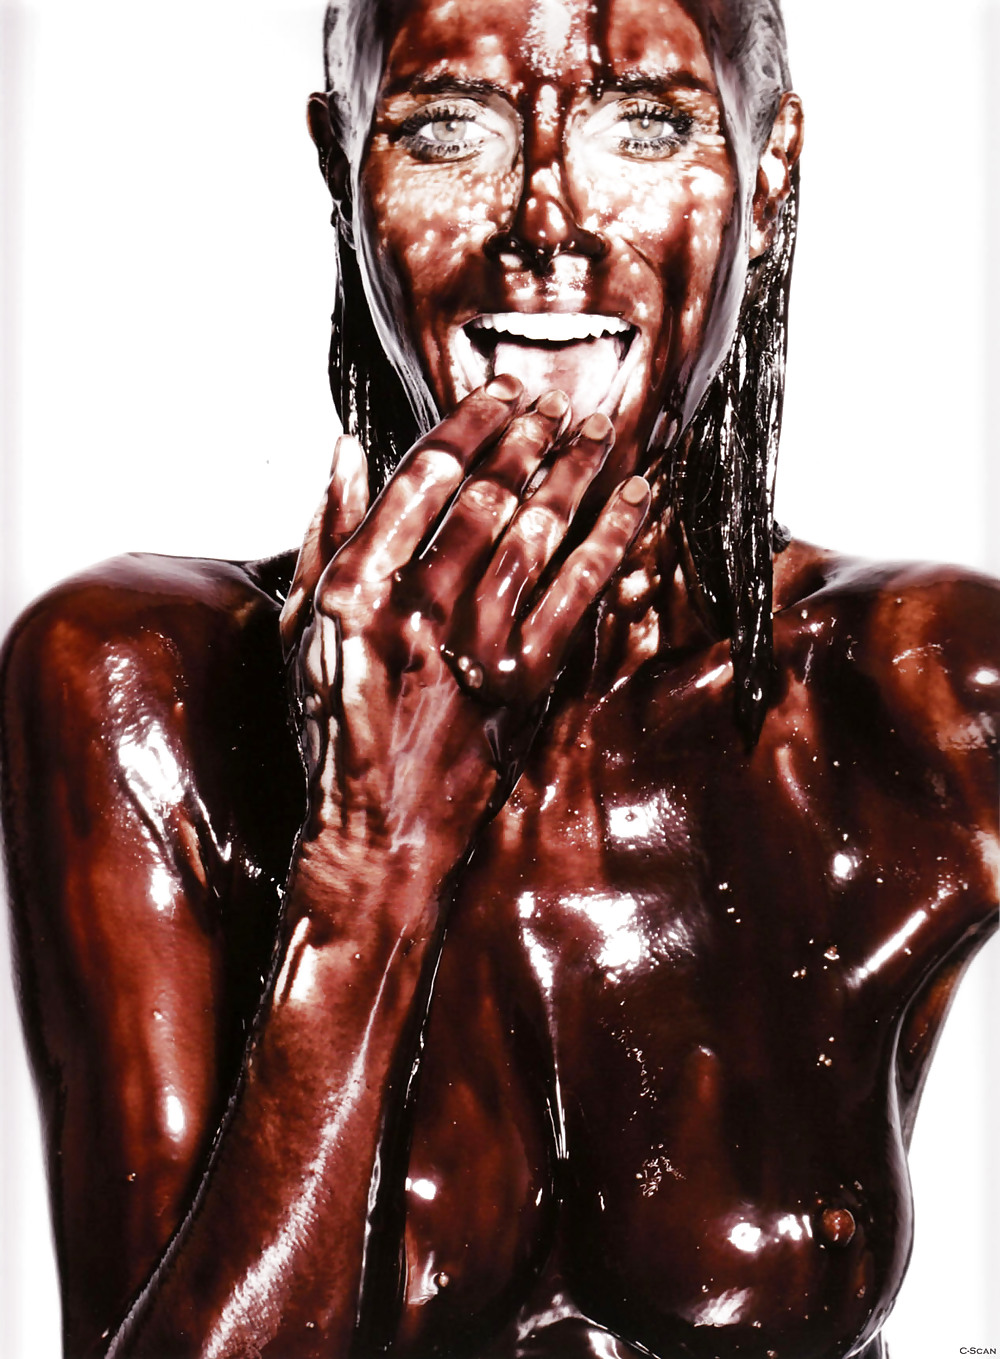 Porn Pics Girls covered in candies syrups and all sort of sweet things